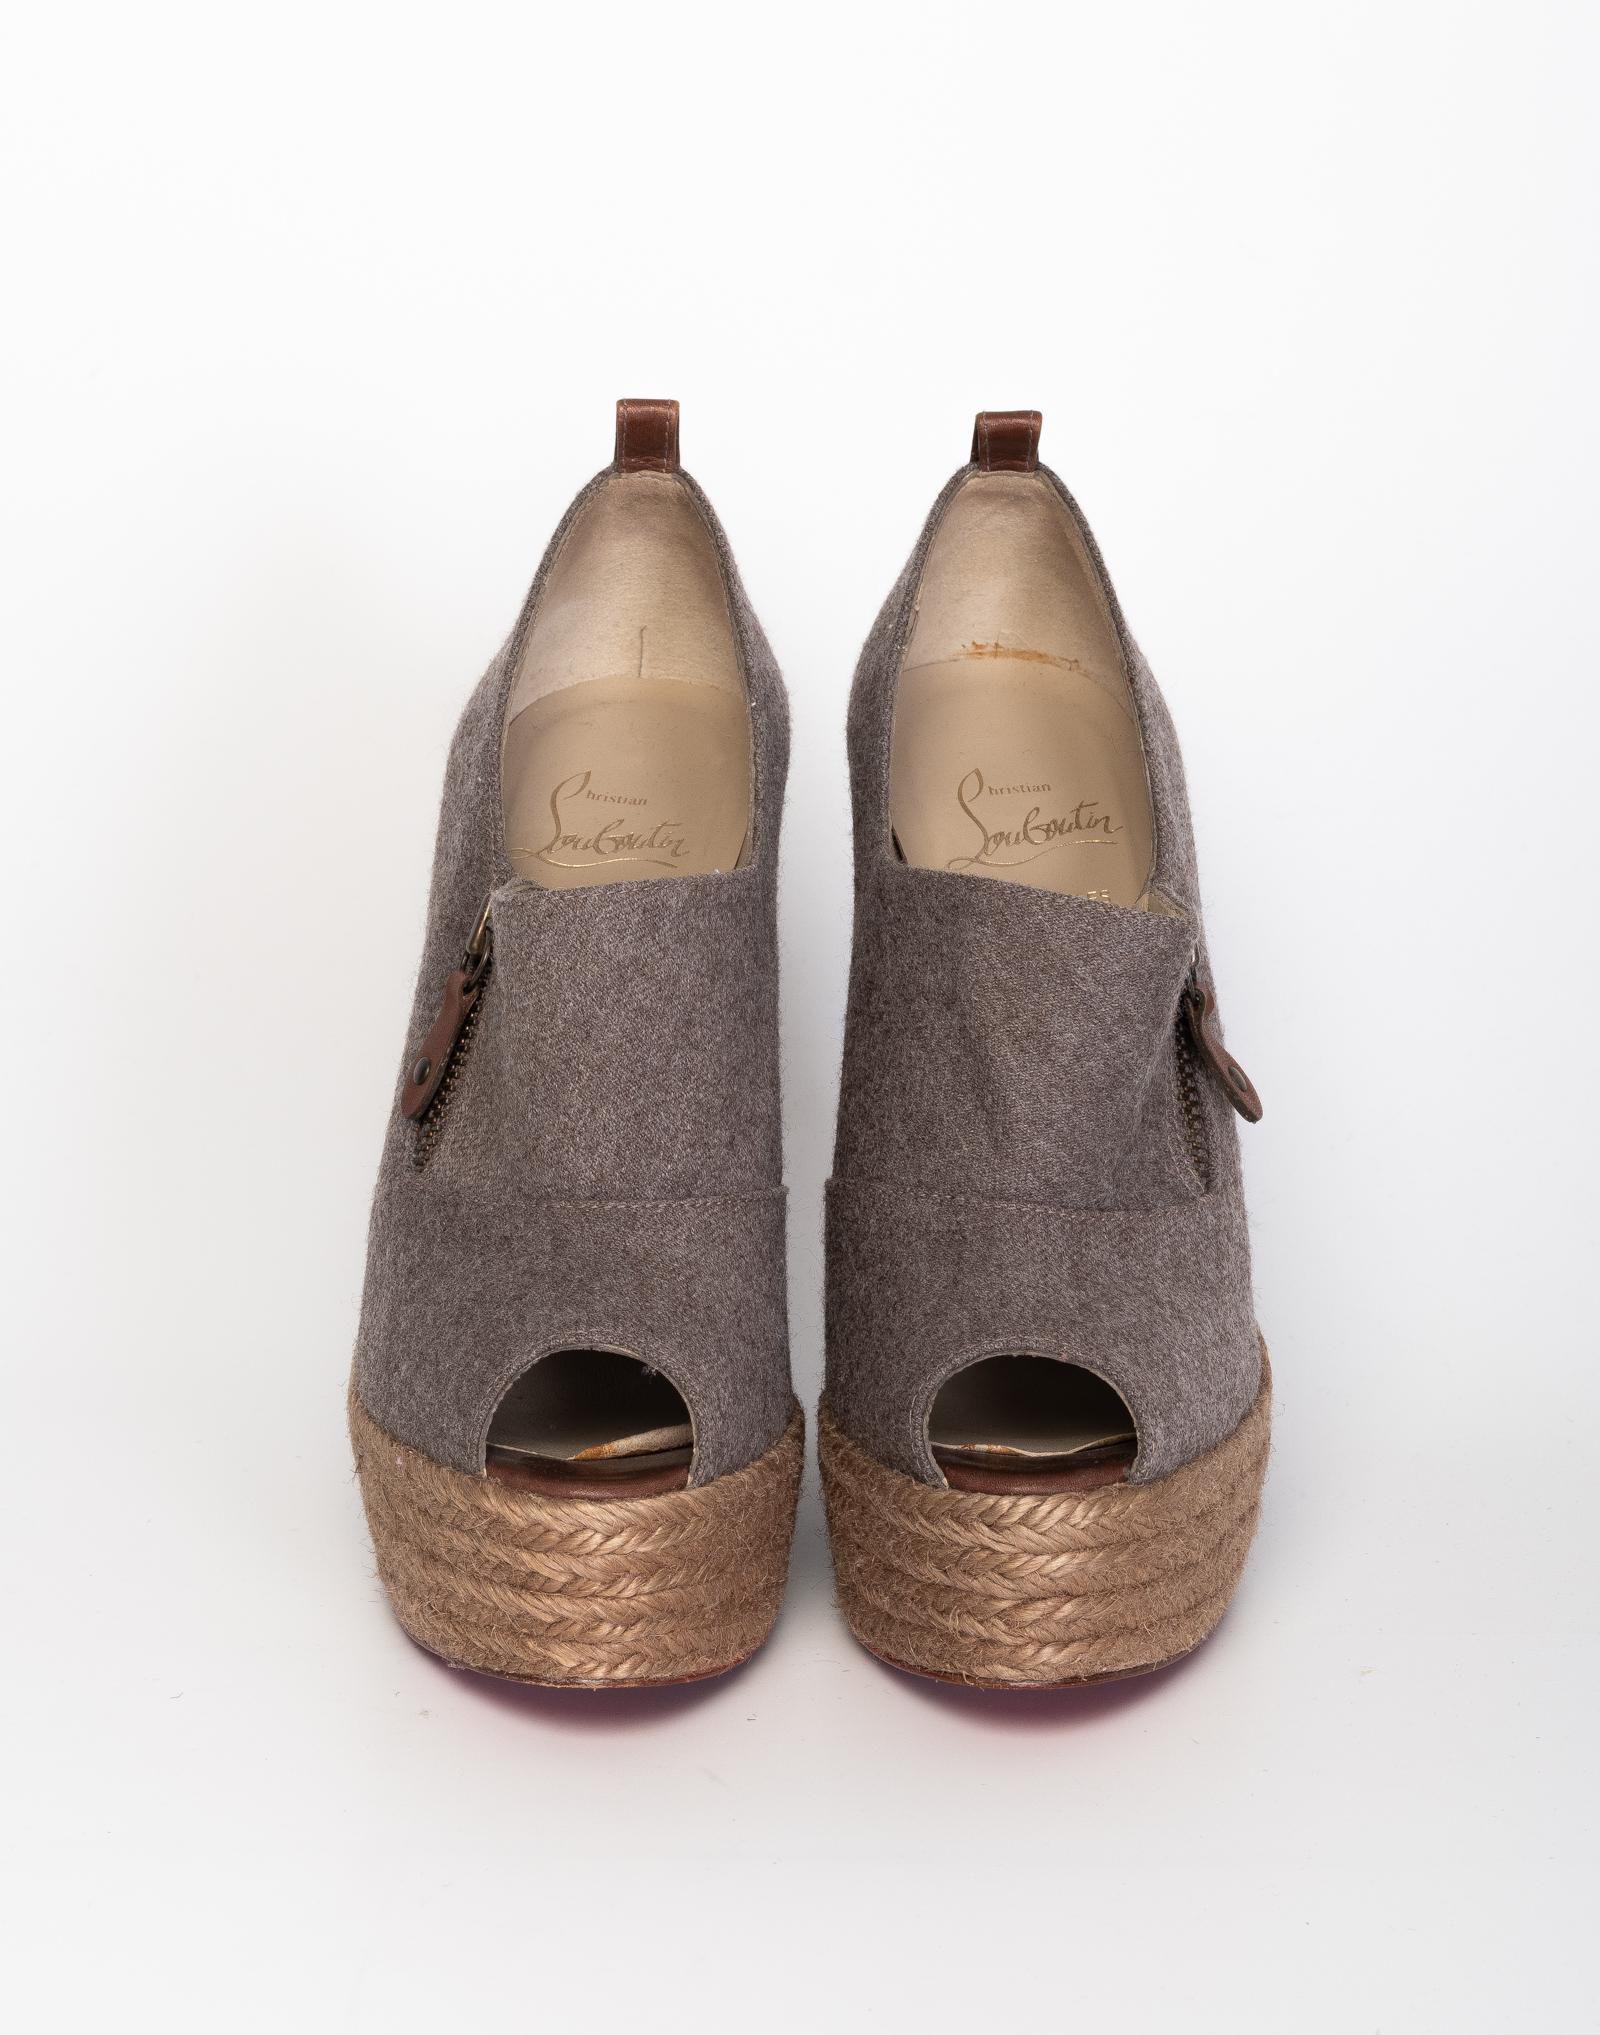 COLOR: grey and brown 
MATERIAL: Wool. Straw and leather 
SIZE: 37 EU
HEEL HEIGHT: 100 mm (4 inches)
COMES WITH: Dust bag
CONDITION: Bottoms are worn with stains & scuffs, but the top is in great shape.

Made in Spain